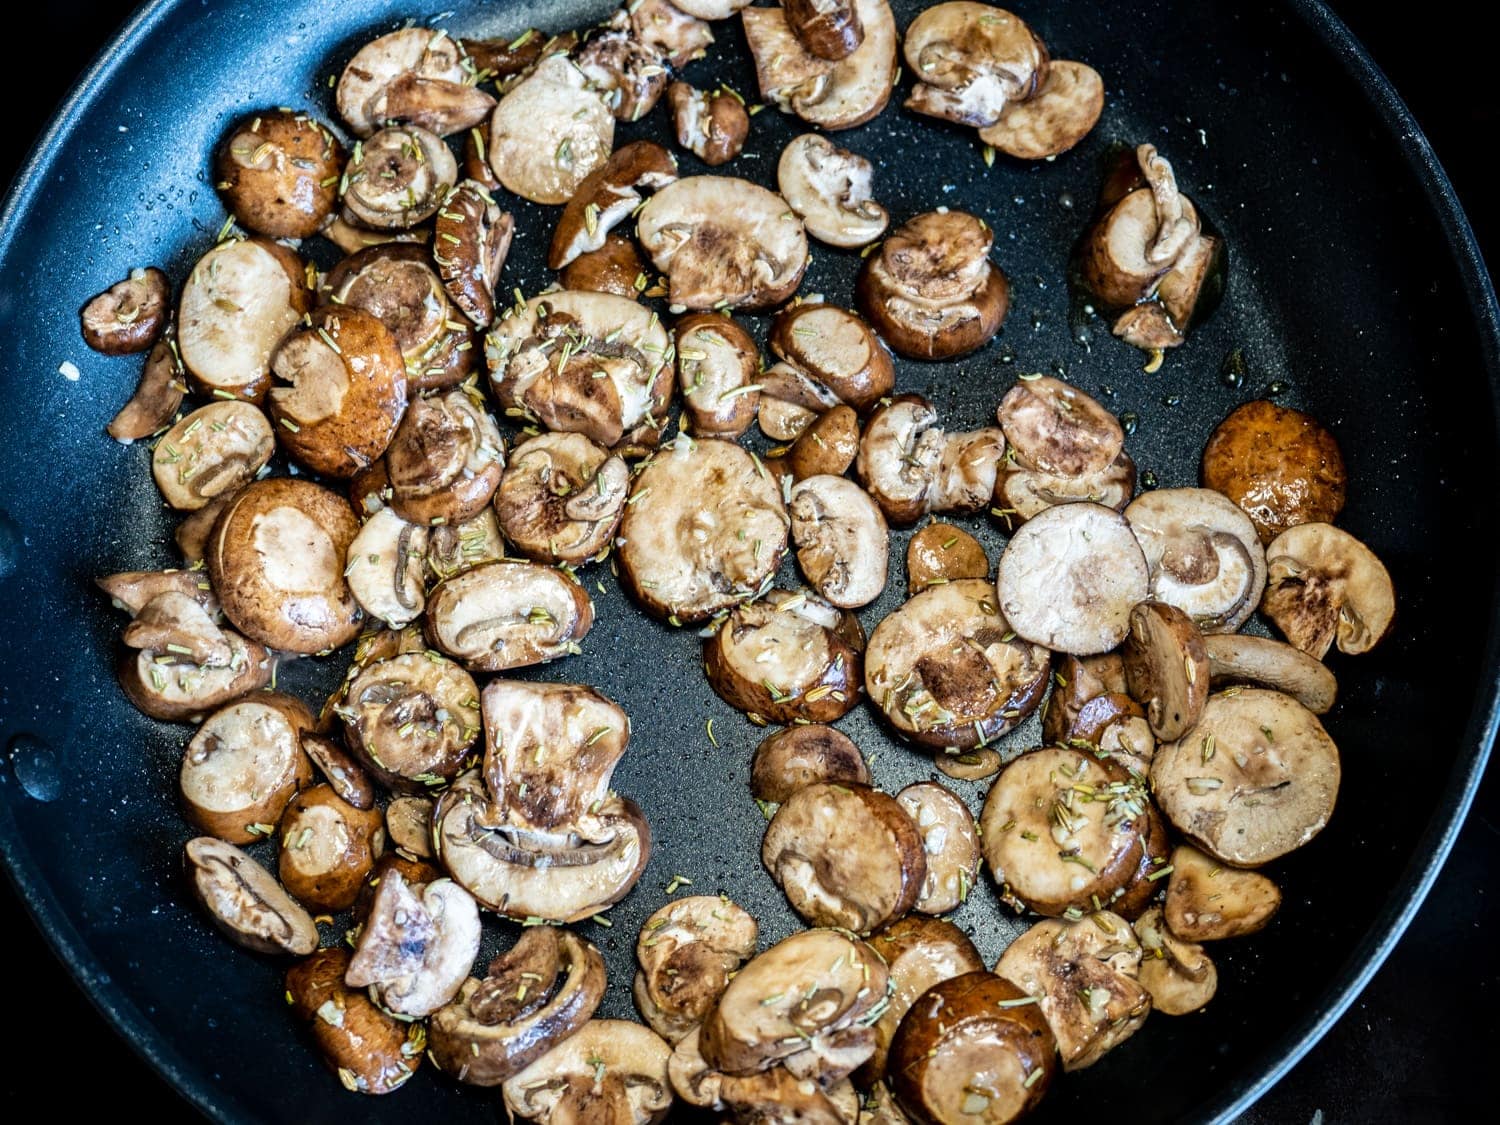 Mushrooms cooking in non-stick skillet